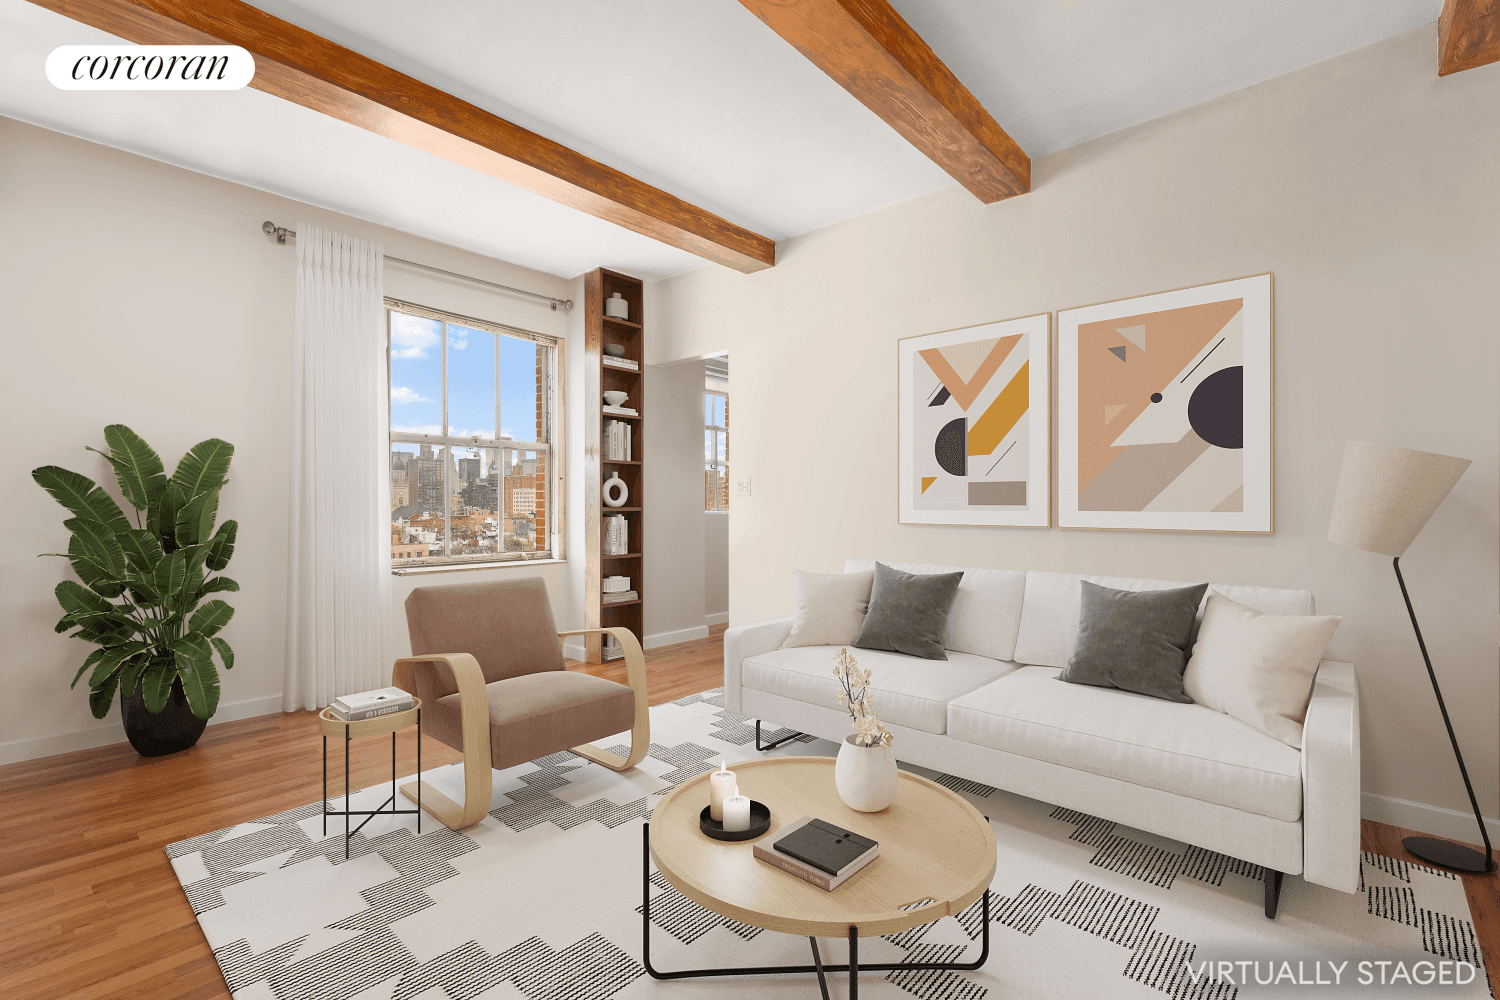 Located at 143 Avenue B, a desirable and historic pre war condominium, this loft like 1 BR 1 BA apartment has soaring beamed ceilings 10'5, and oversized windows encompassing breathtaking ...